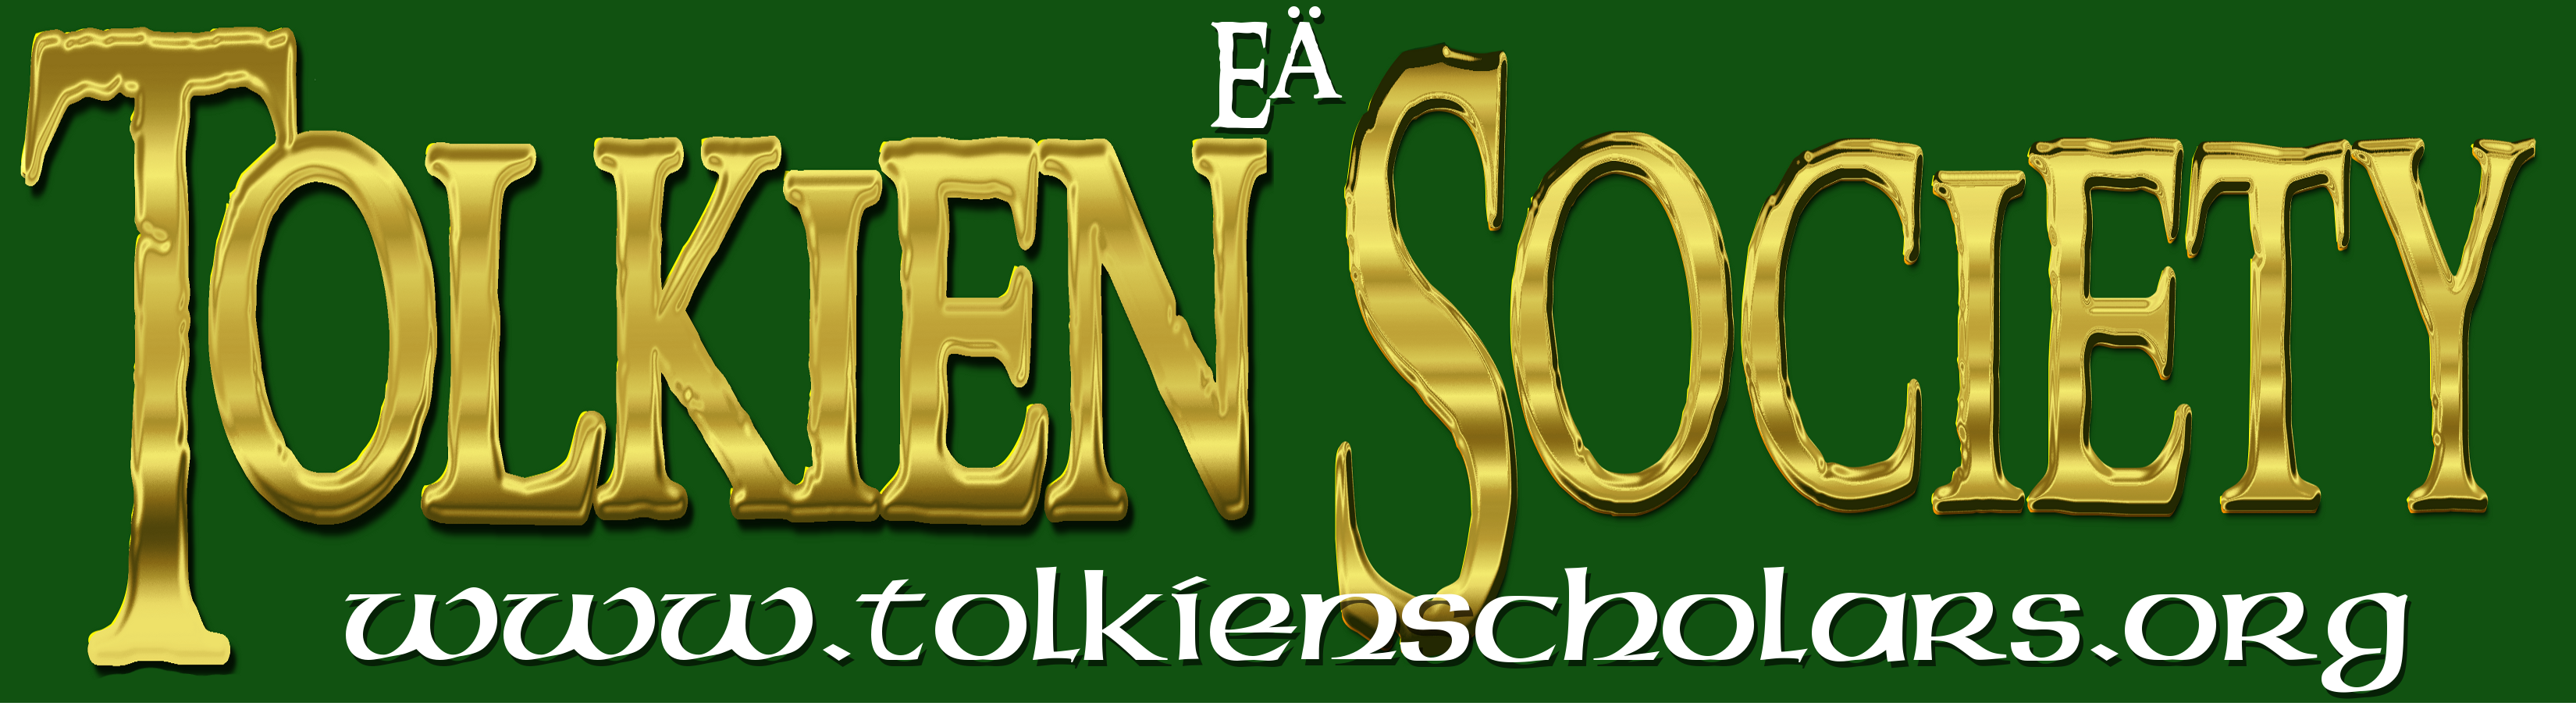 Reminder: Eä Tolkien Society Meeting & Broadcast December 18th, 2021 1-3 pm Pacific Time 